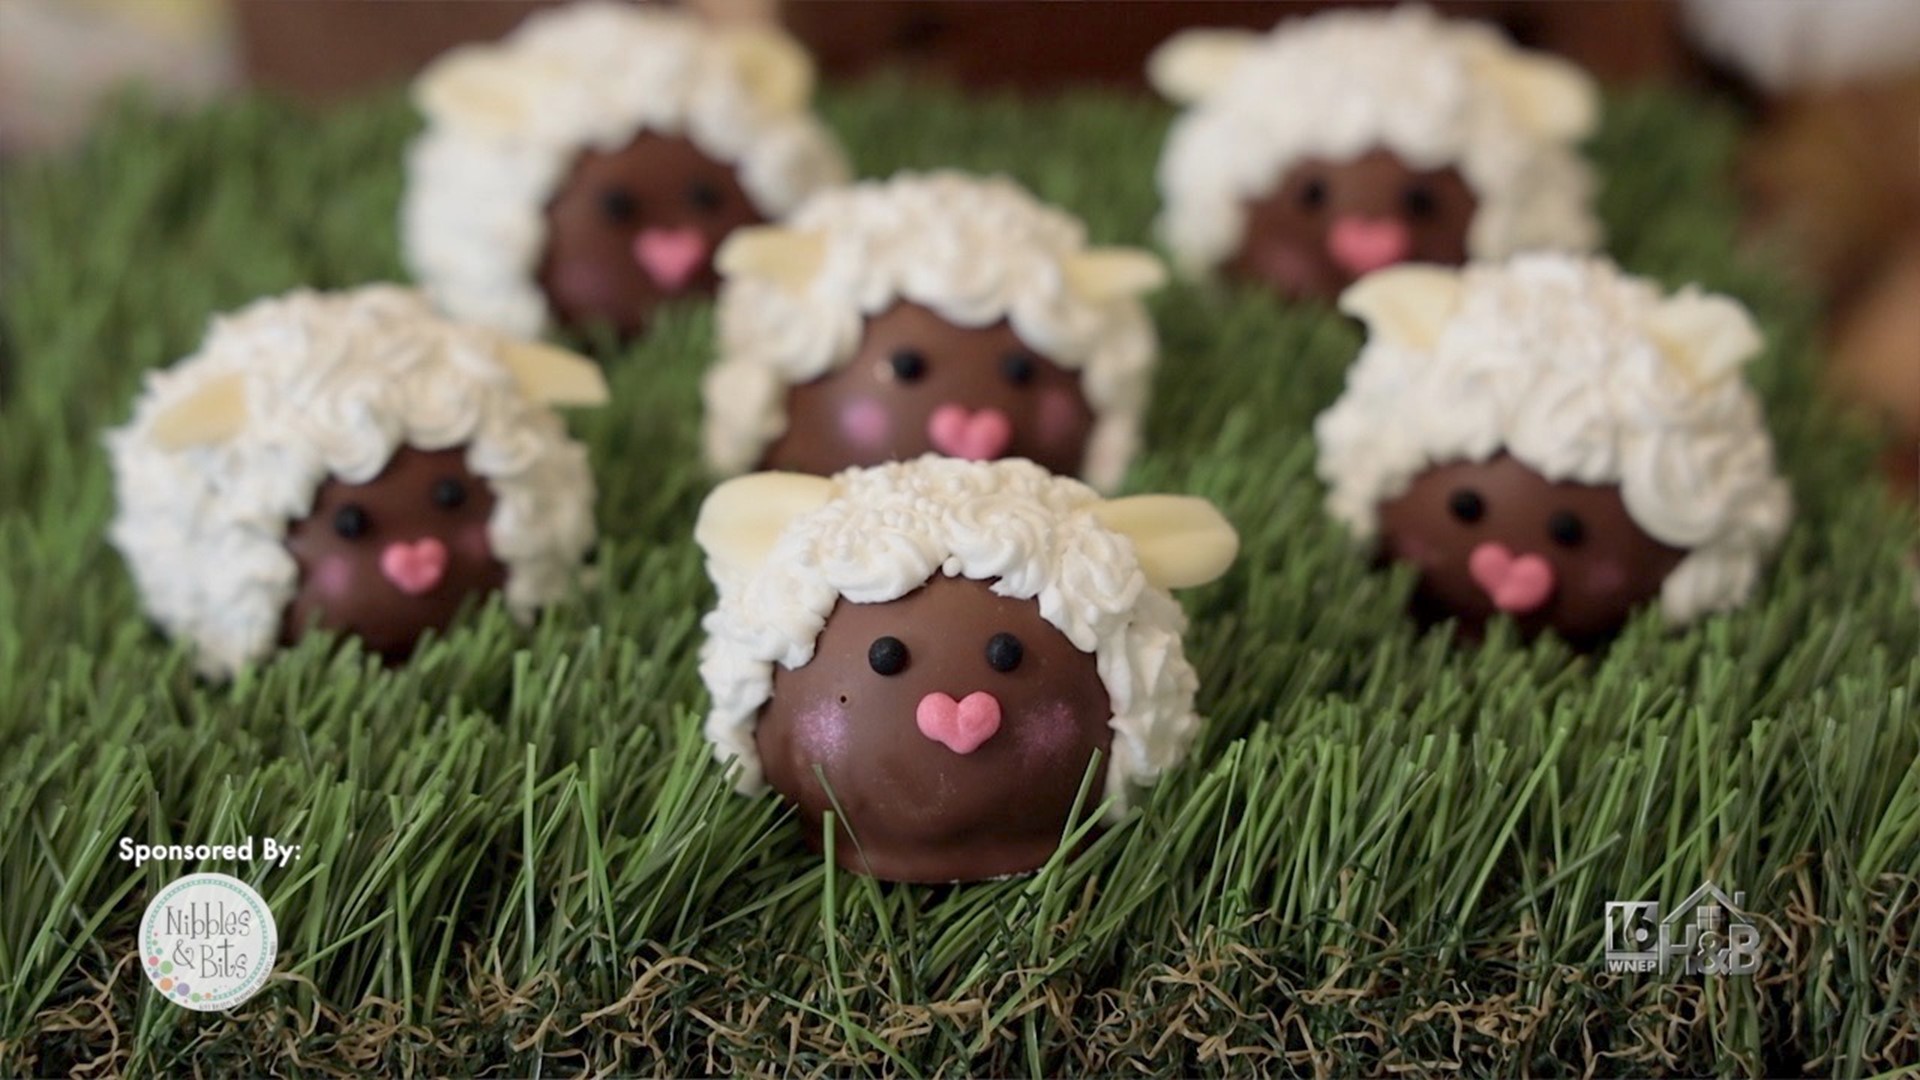 Specialty Easter Truffles, Marshmallow Peeps and Chocolate Treats Beautifully Handcrafted by Nibbles and Bits!